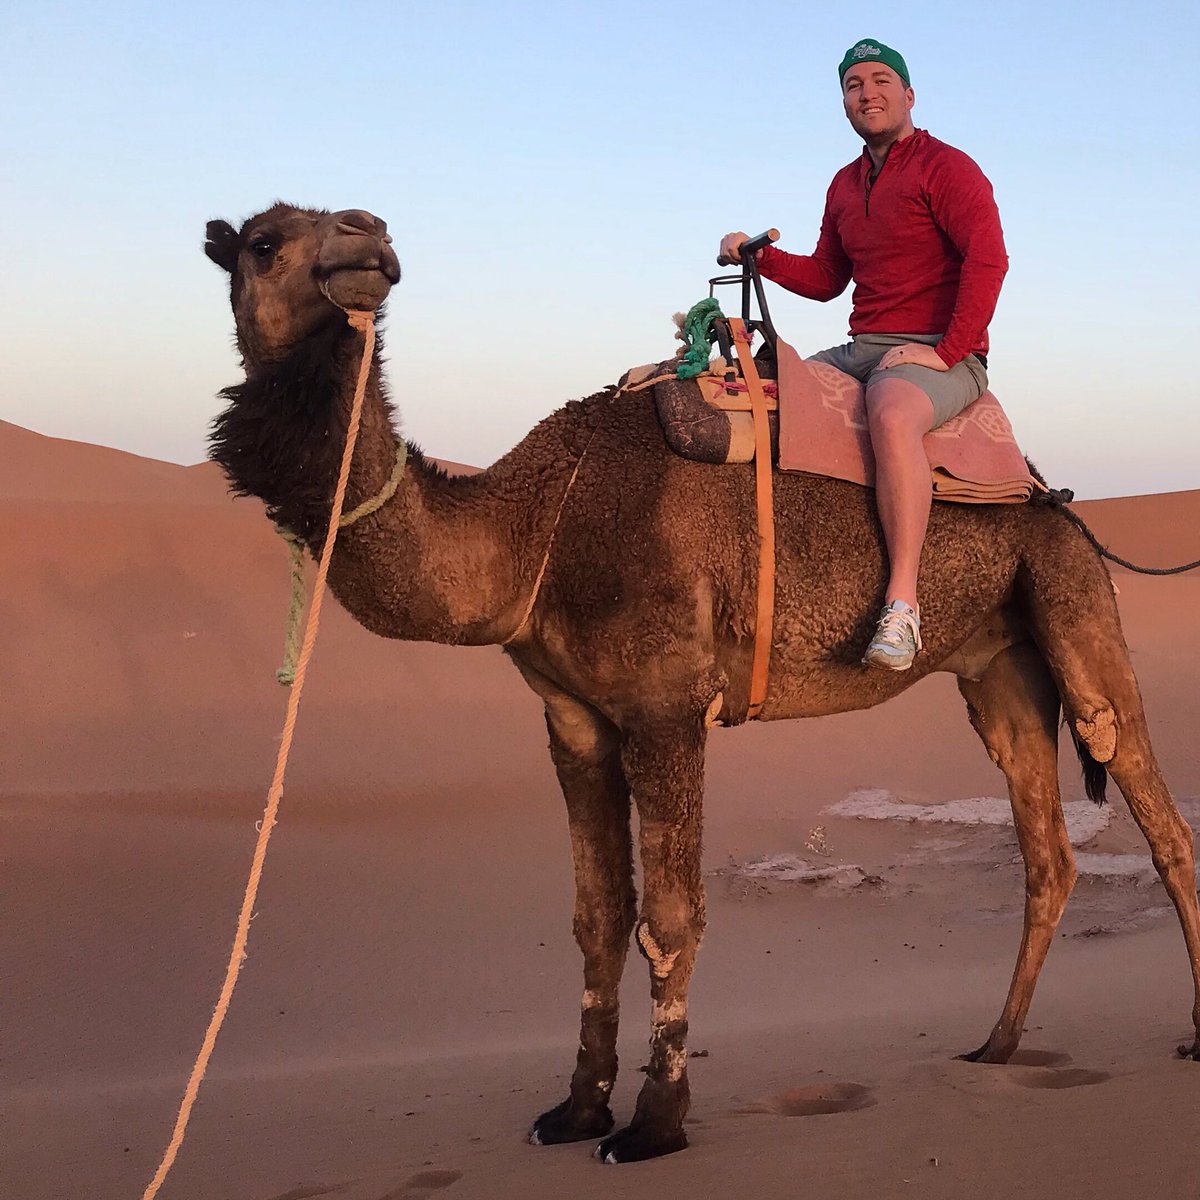 Awesome time in the desert but now begins the long trek home. Thankfully not as long by car and plane as it would be by dromedary! 🐪 🇲🇦